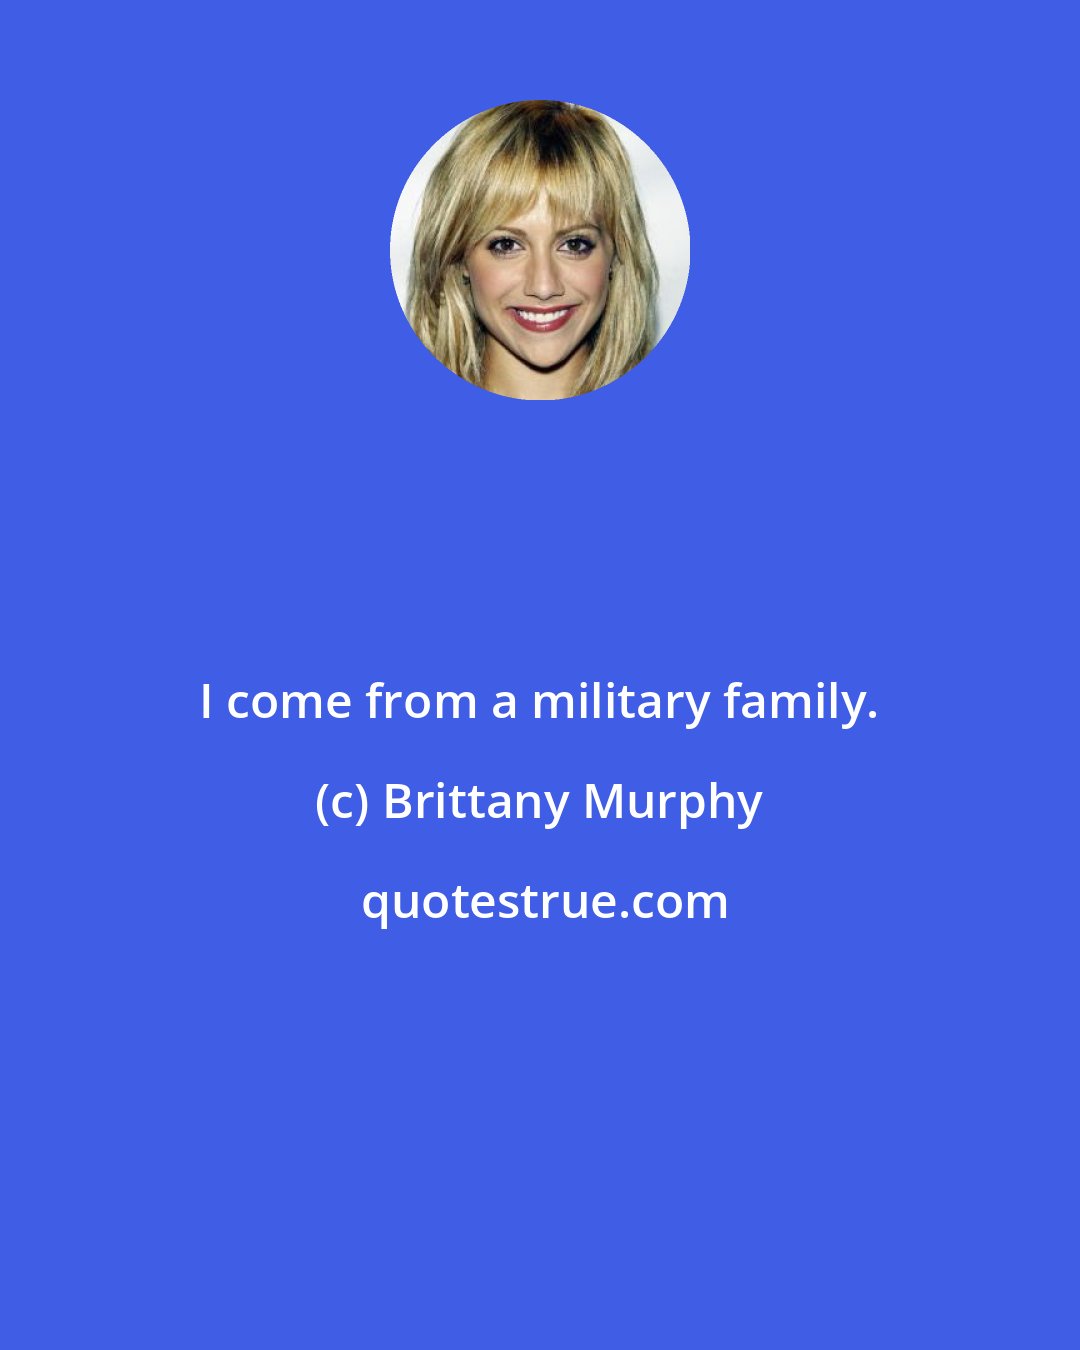 Brittany Murphy: I come from a military family.